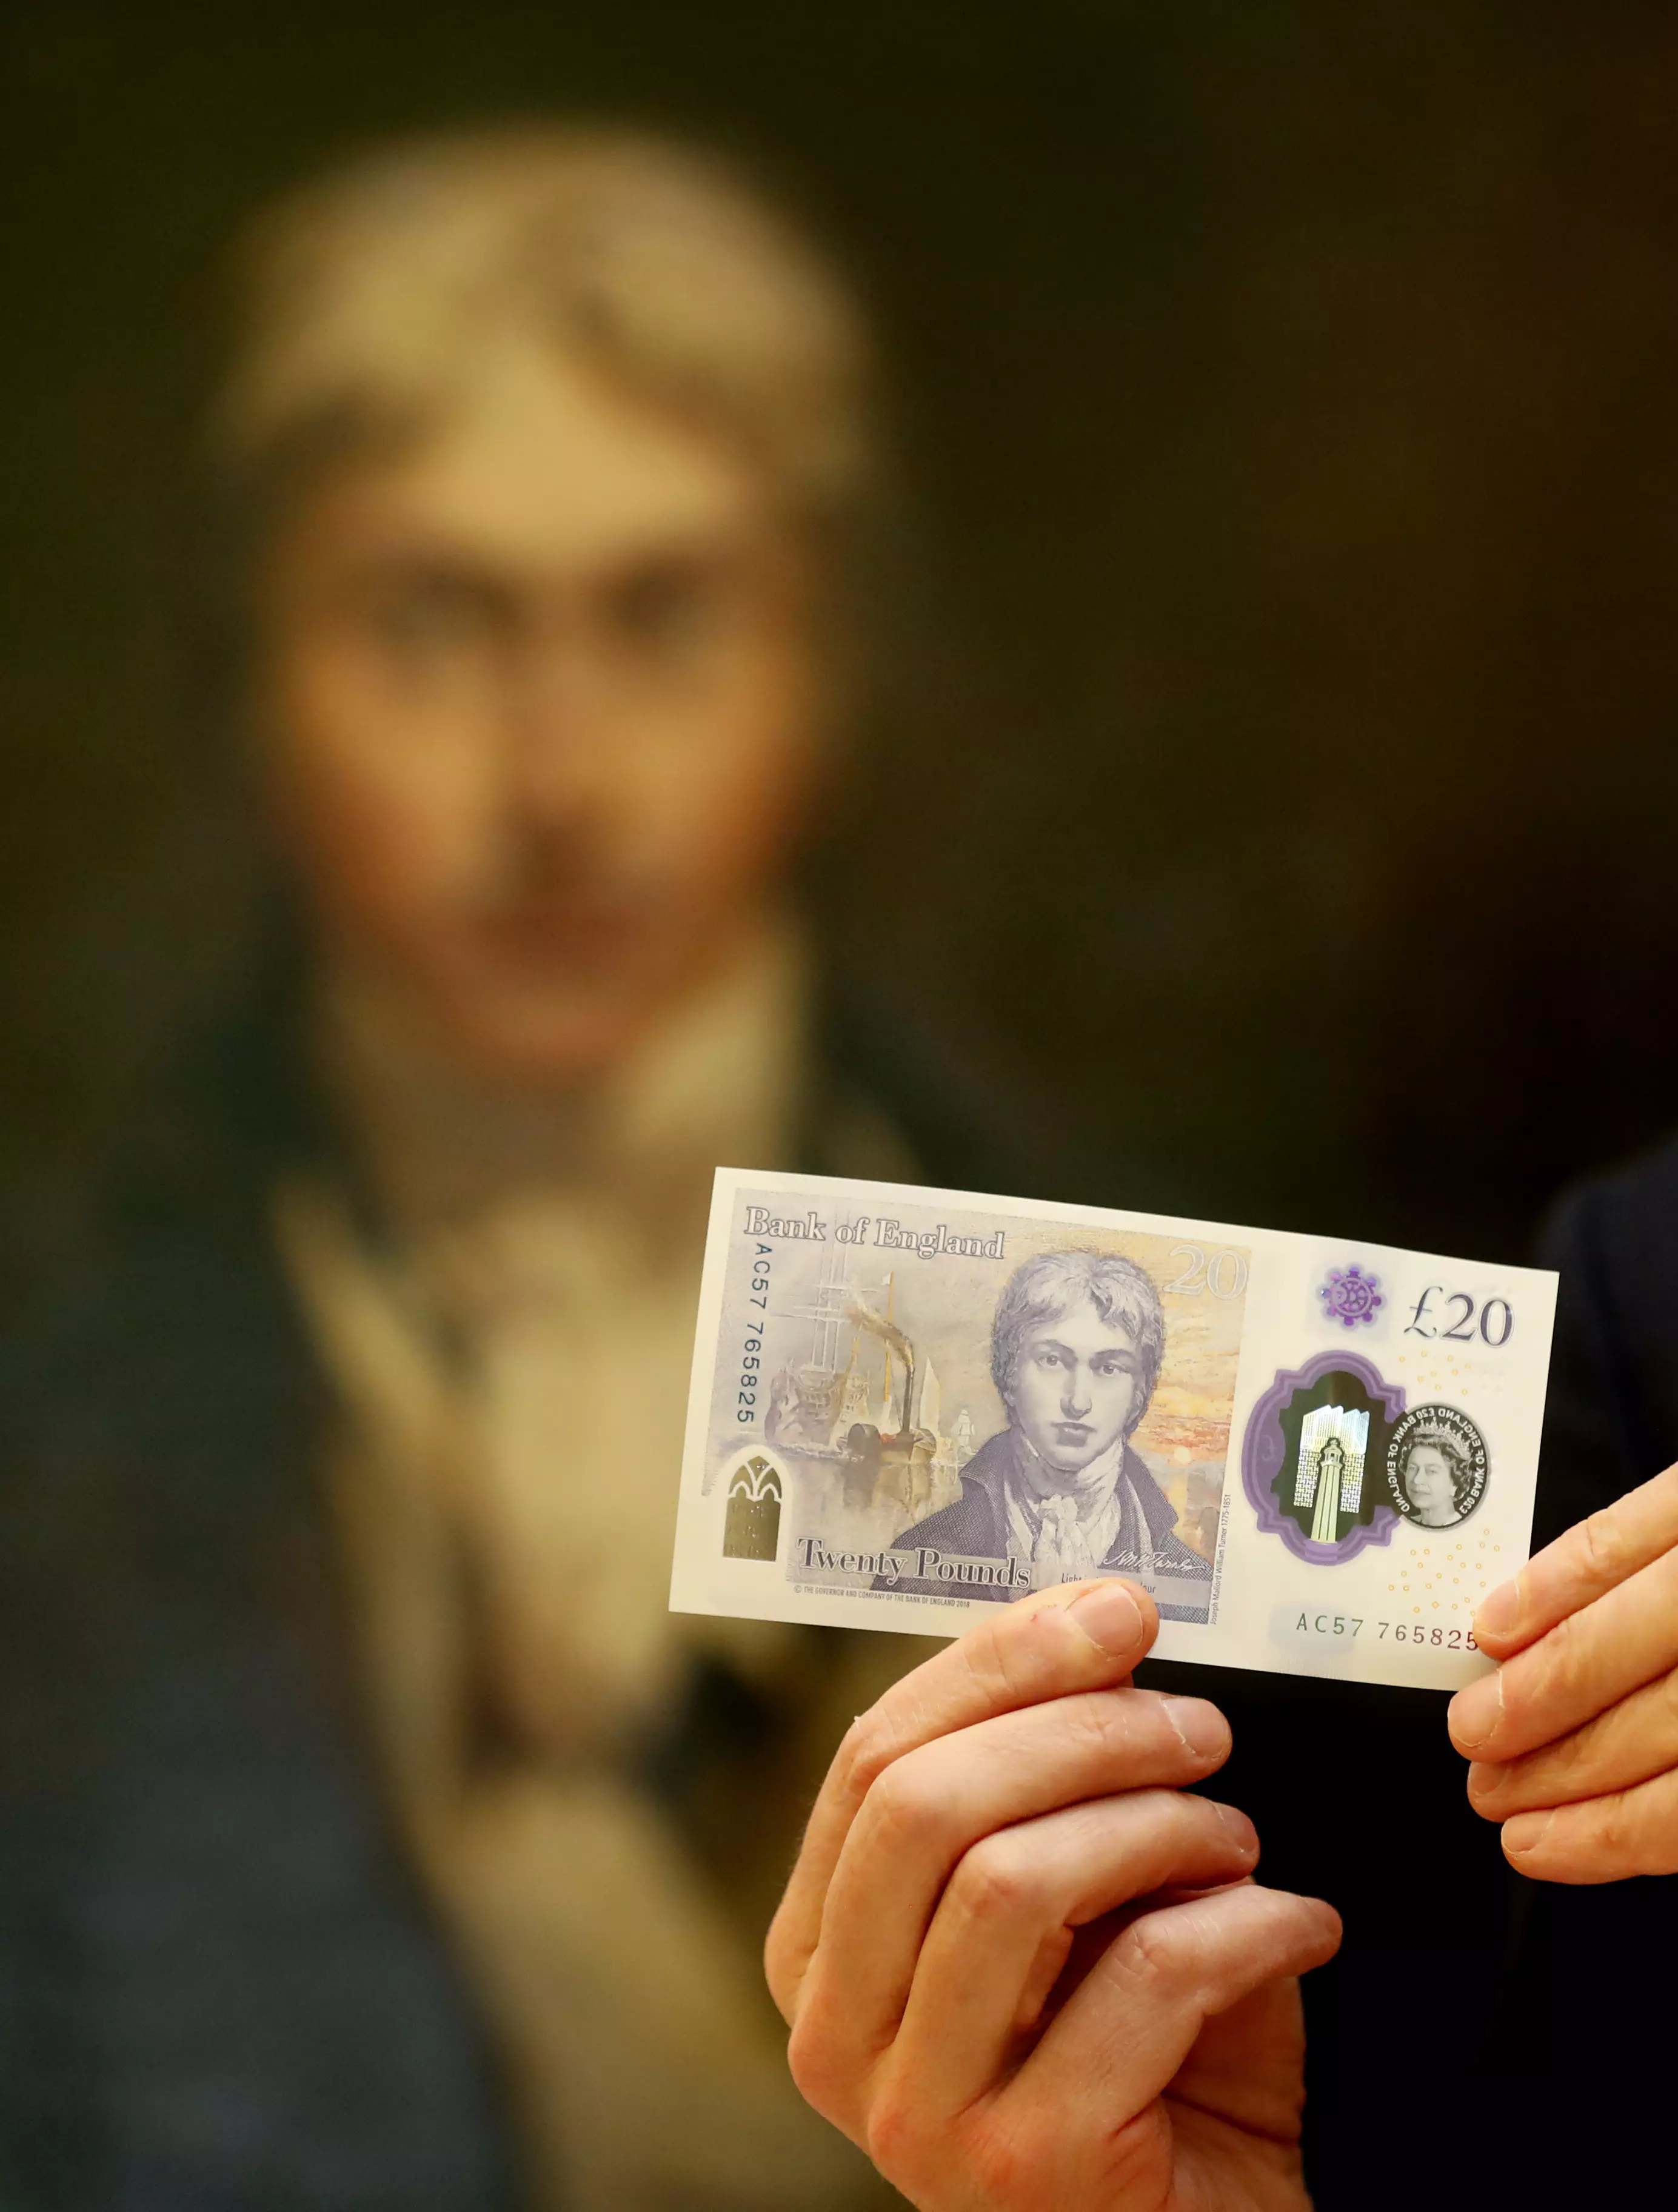 The new £20 note goes into circulation today, but you can keep using the old version for the time being.